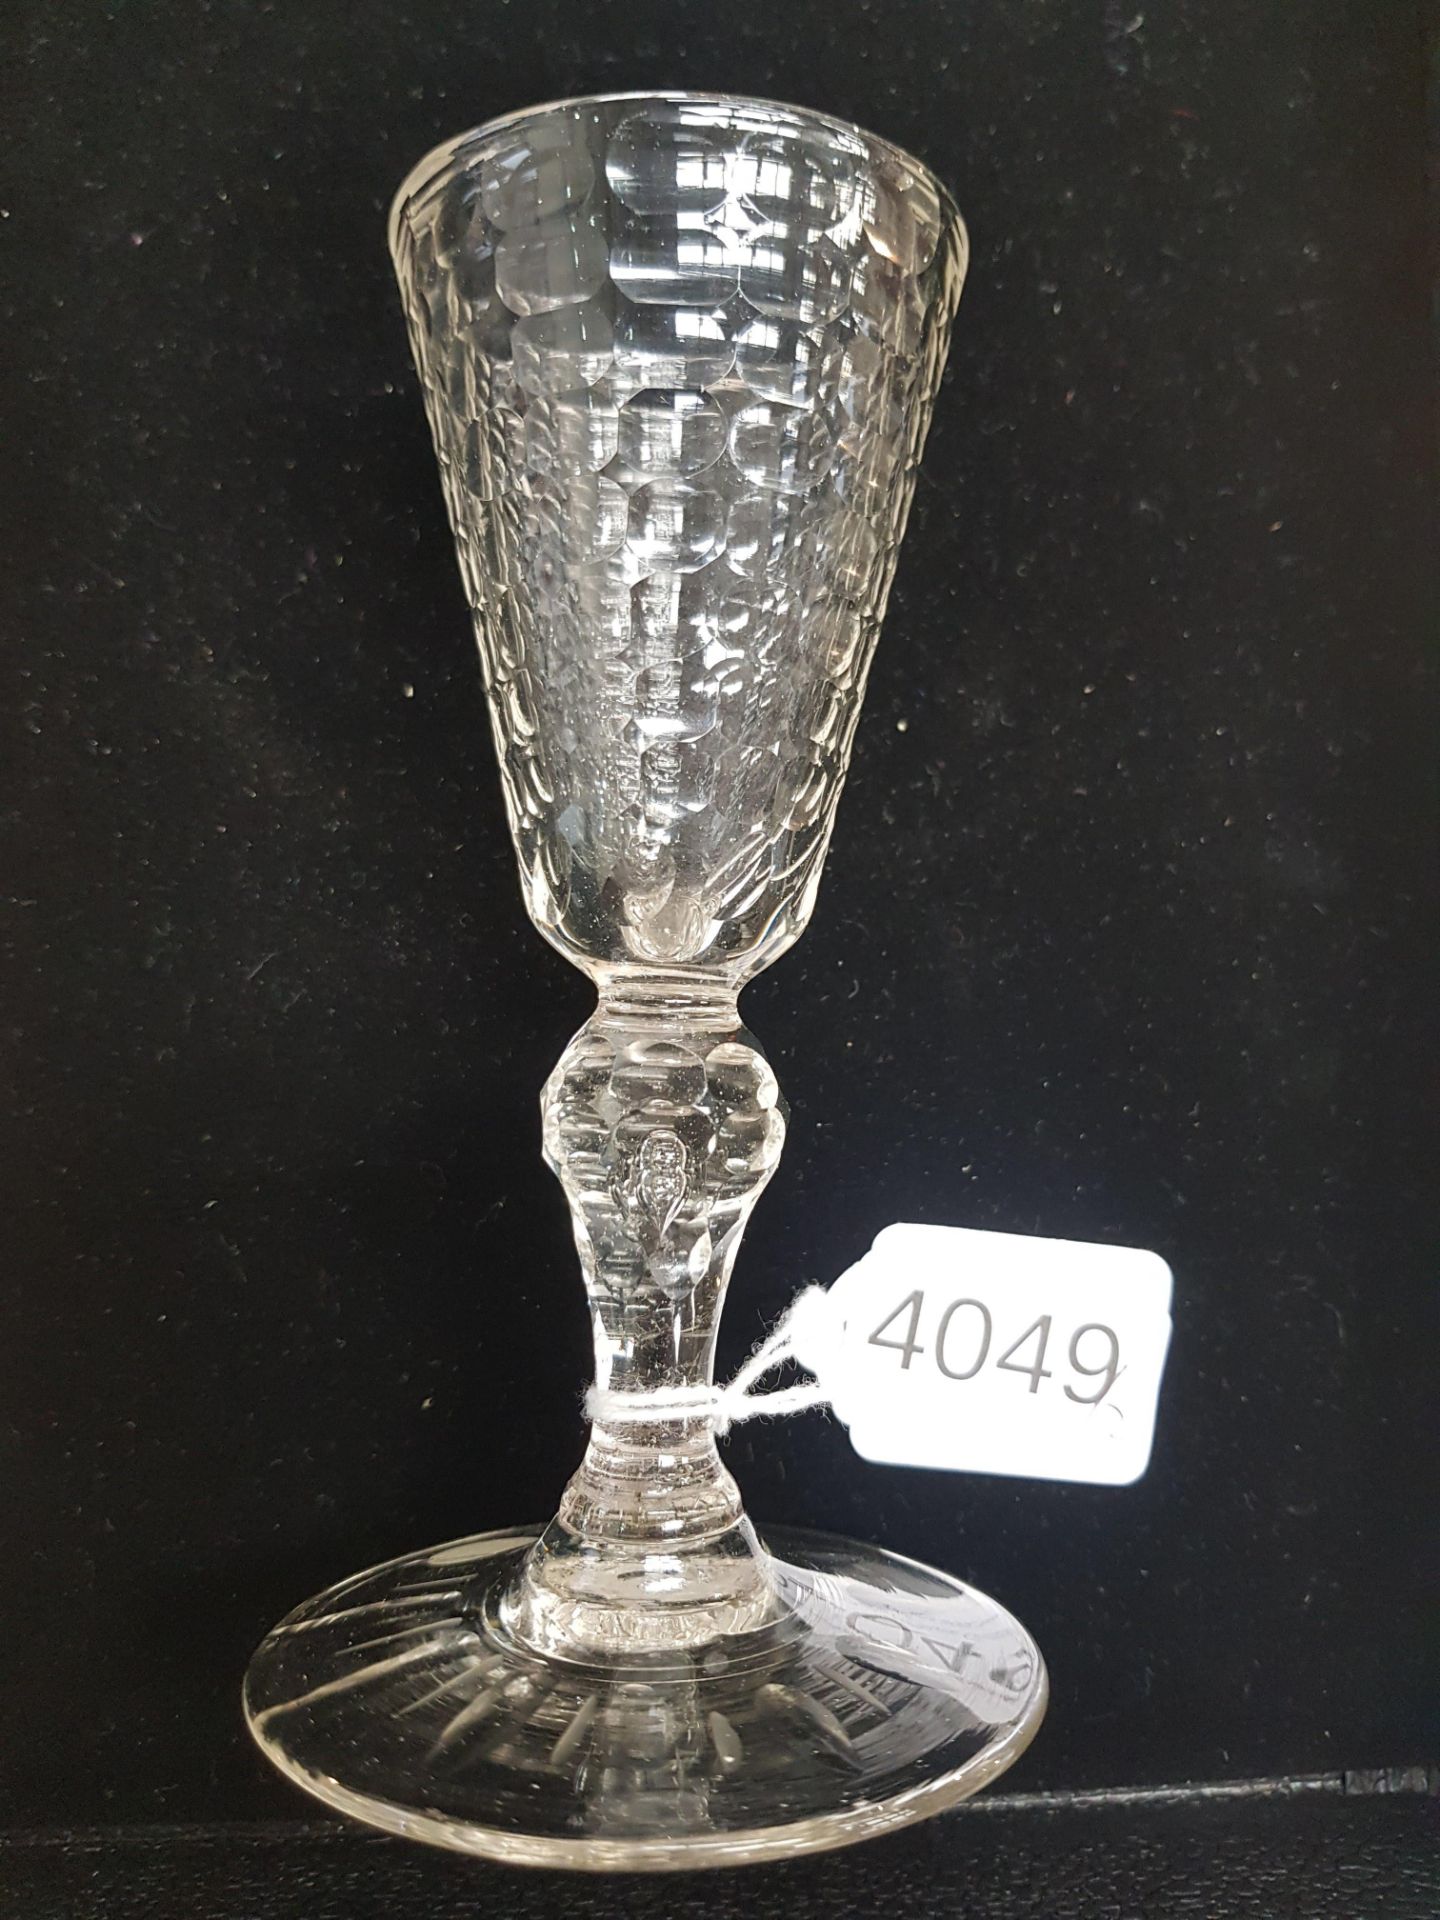 A PAIR OF 18TH CENTURY WINE GLASSES - Image 3 of 3